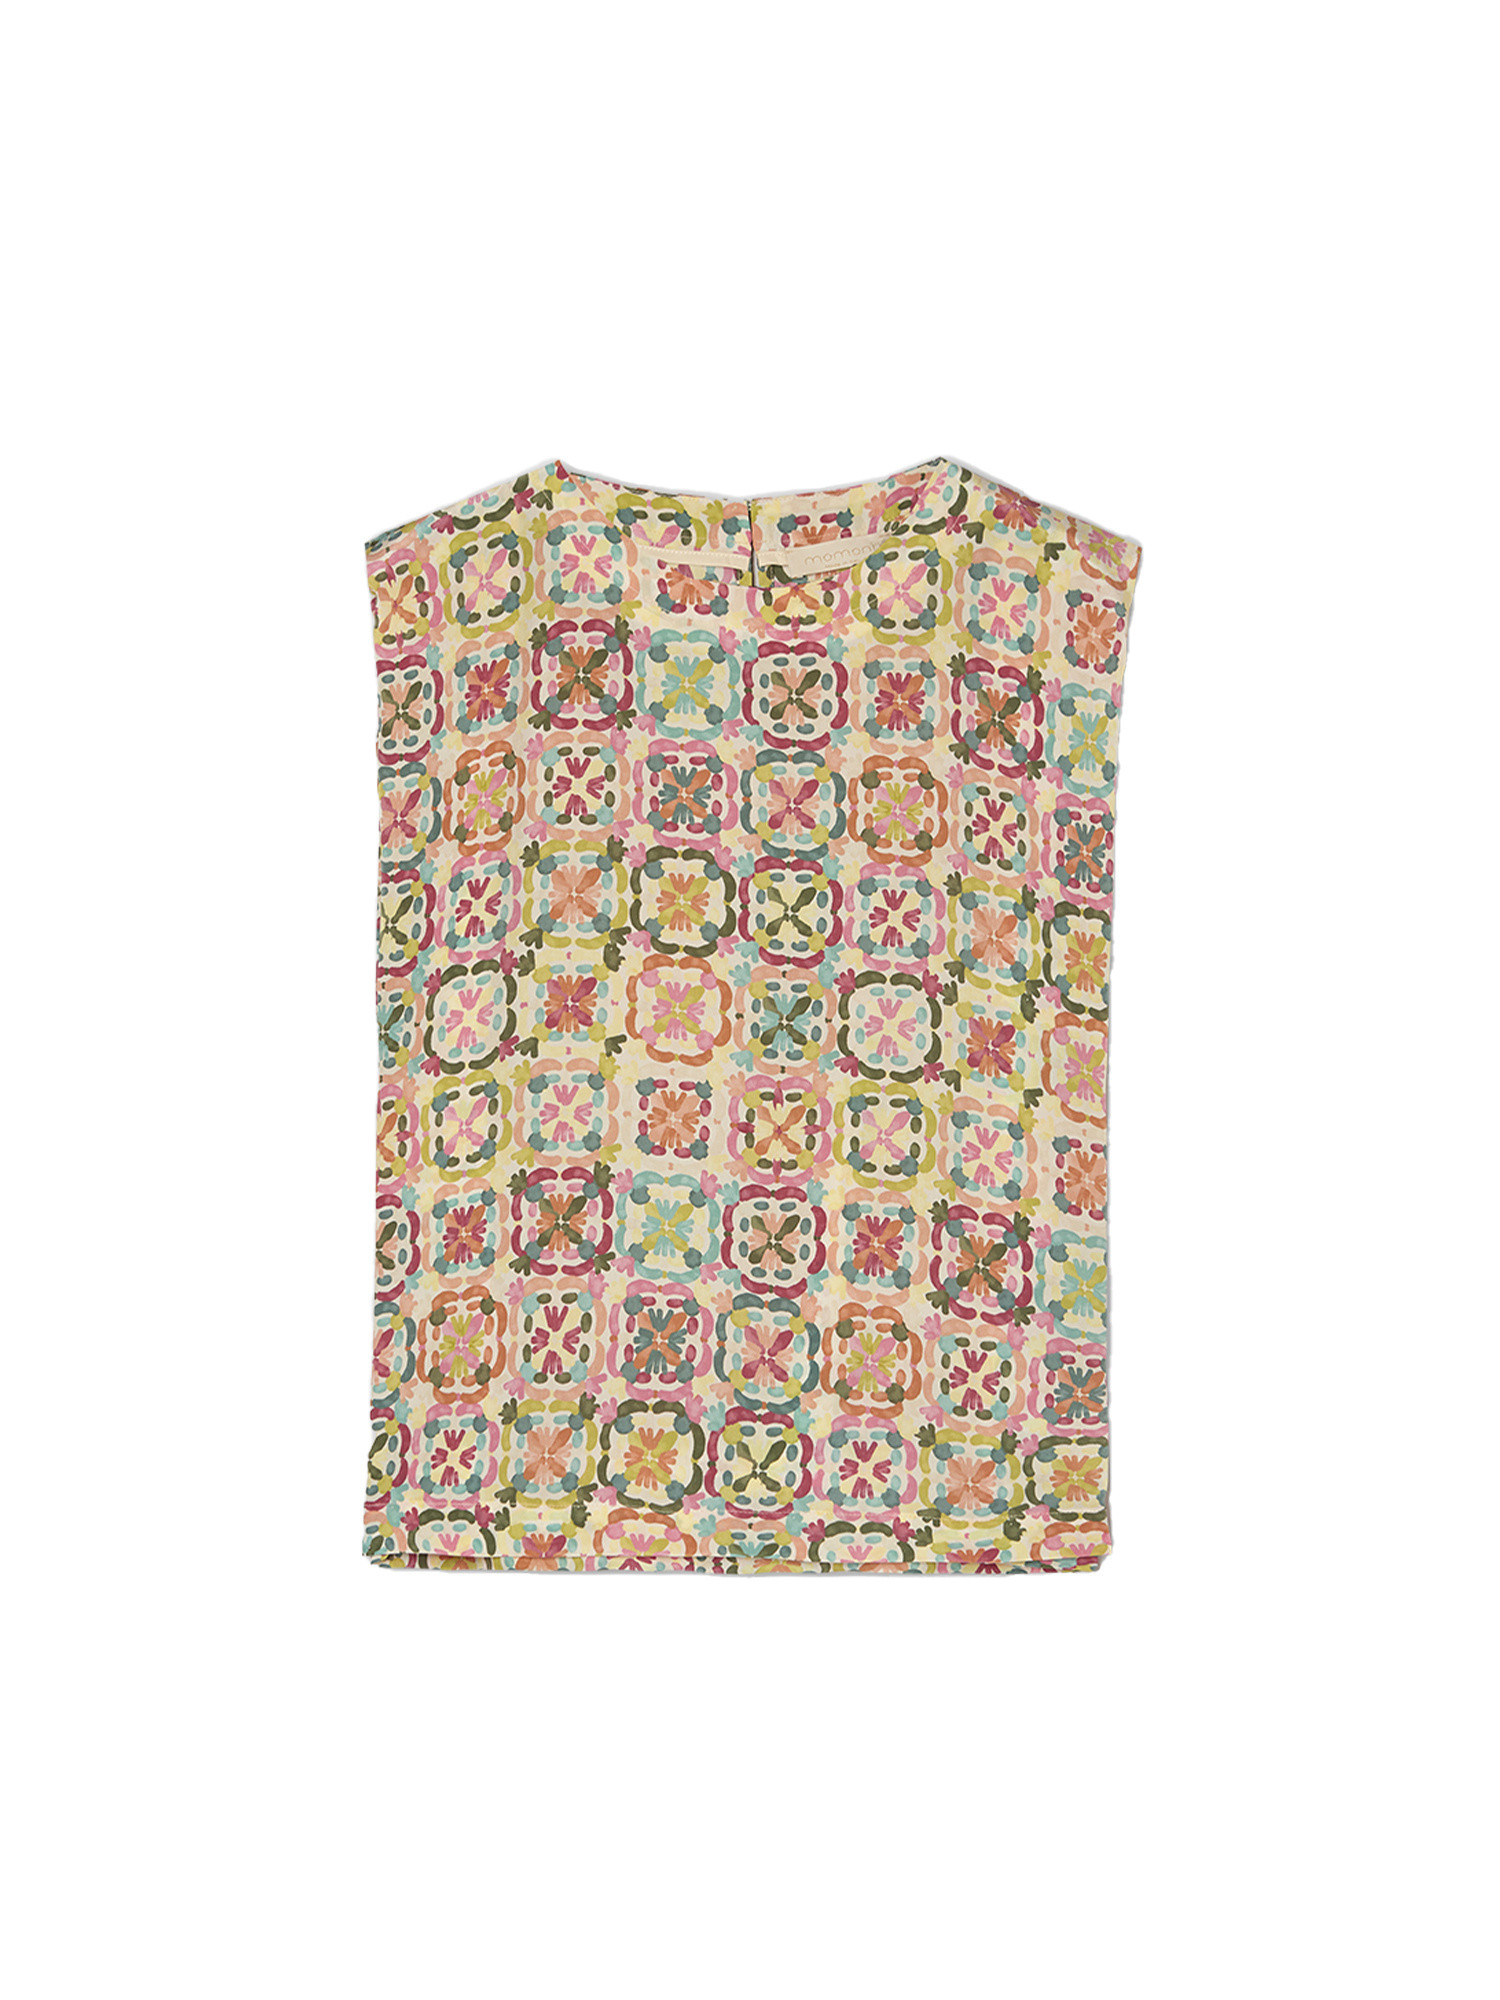 Momonì - Enna top in lurex jersey, Multicolor, large image number 0